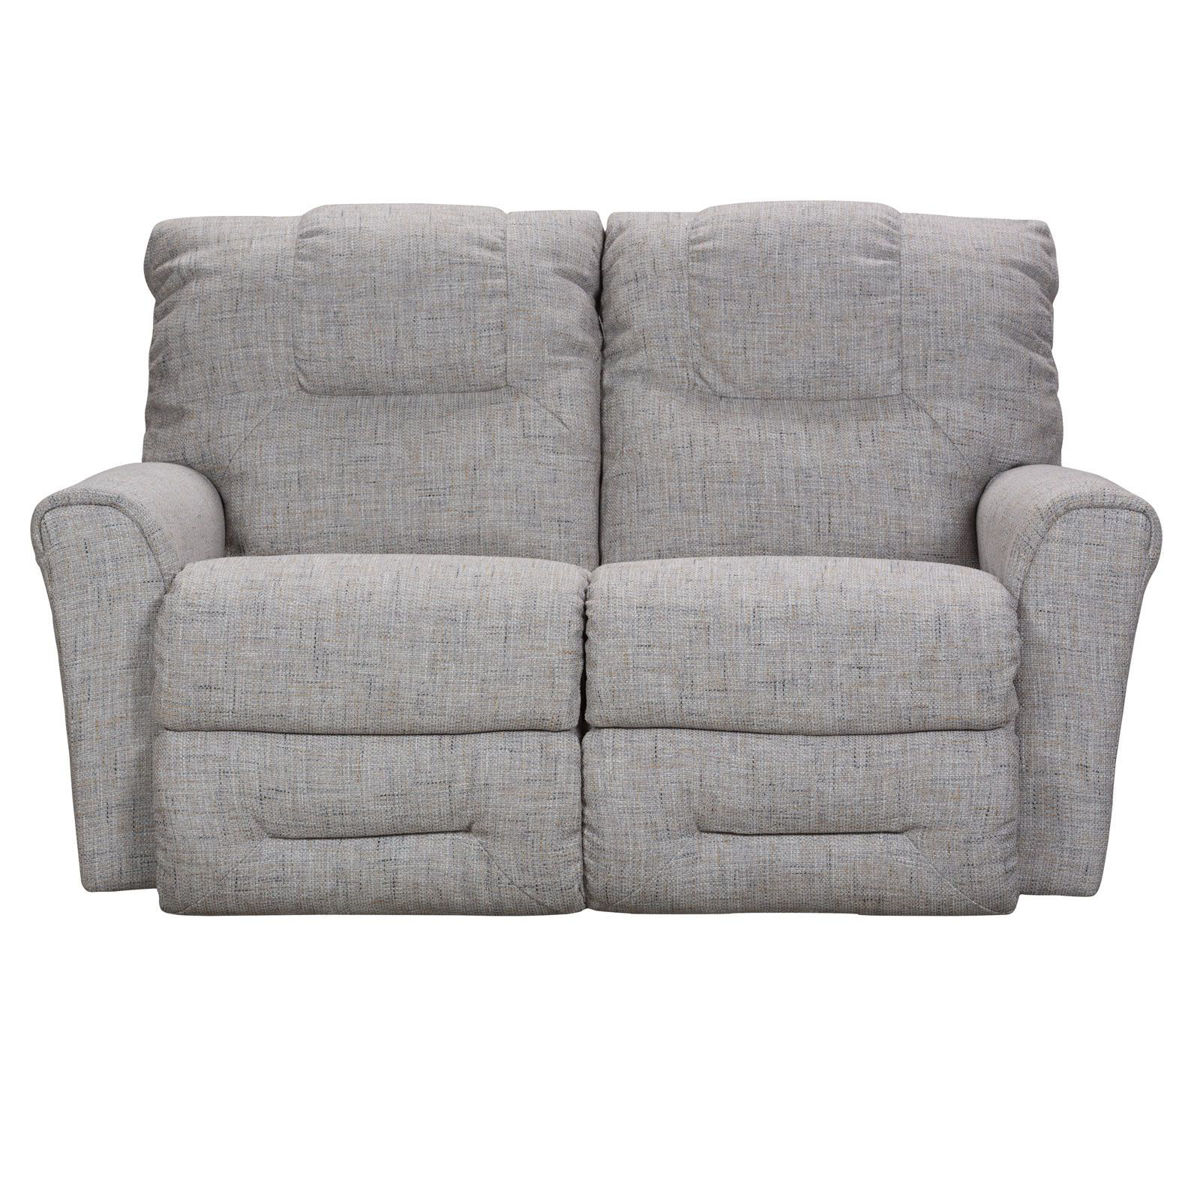 Picture of Easton Ash Recliner Loveseat